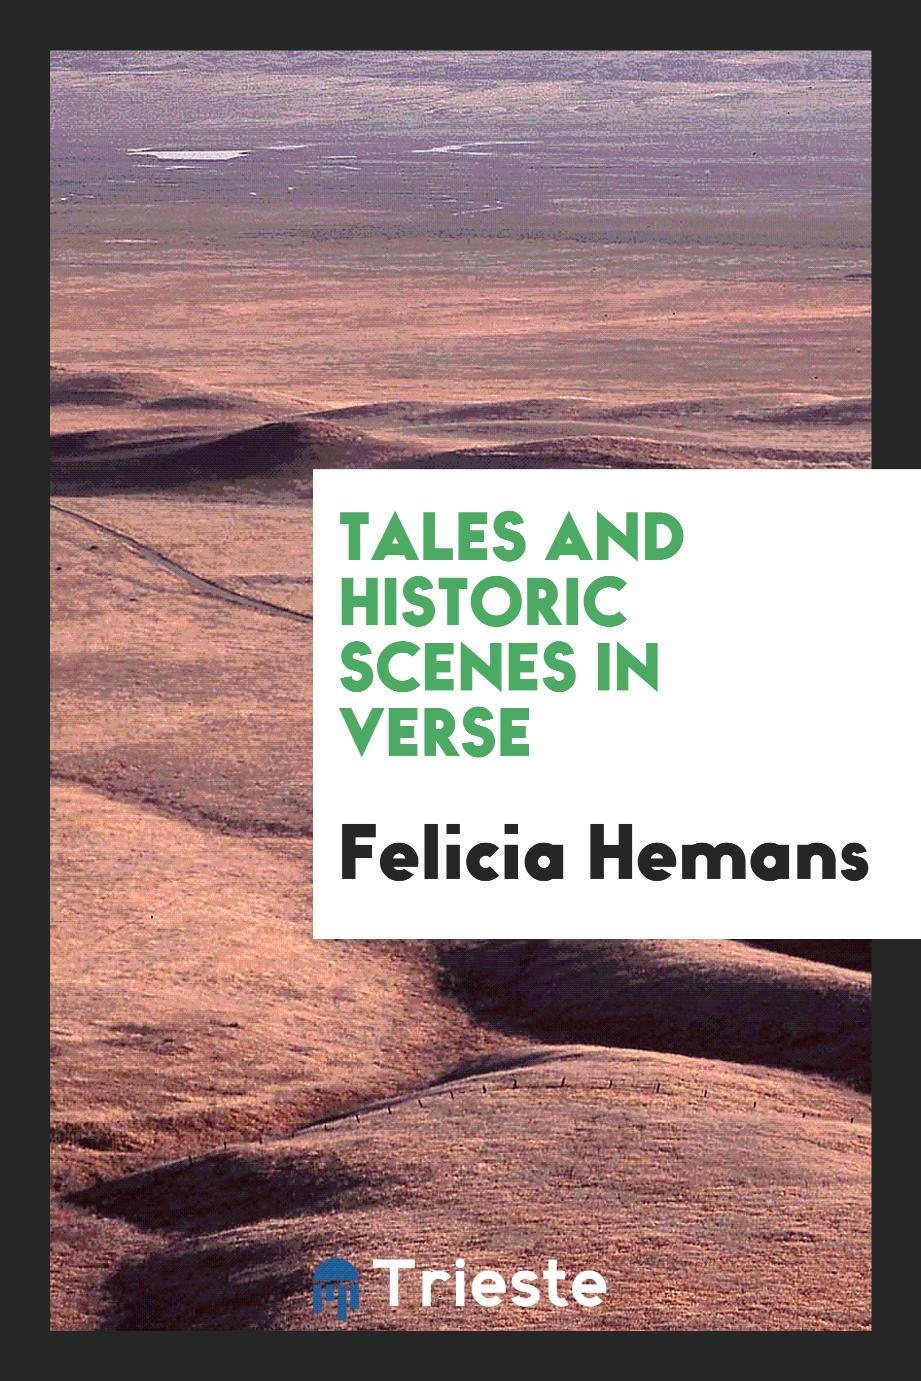 Tales and historic scenes in verse